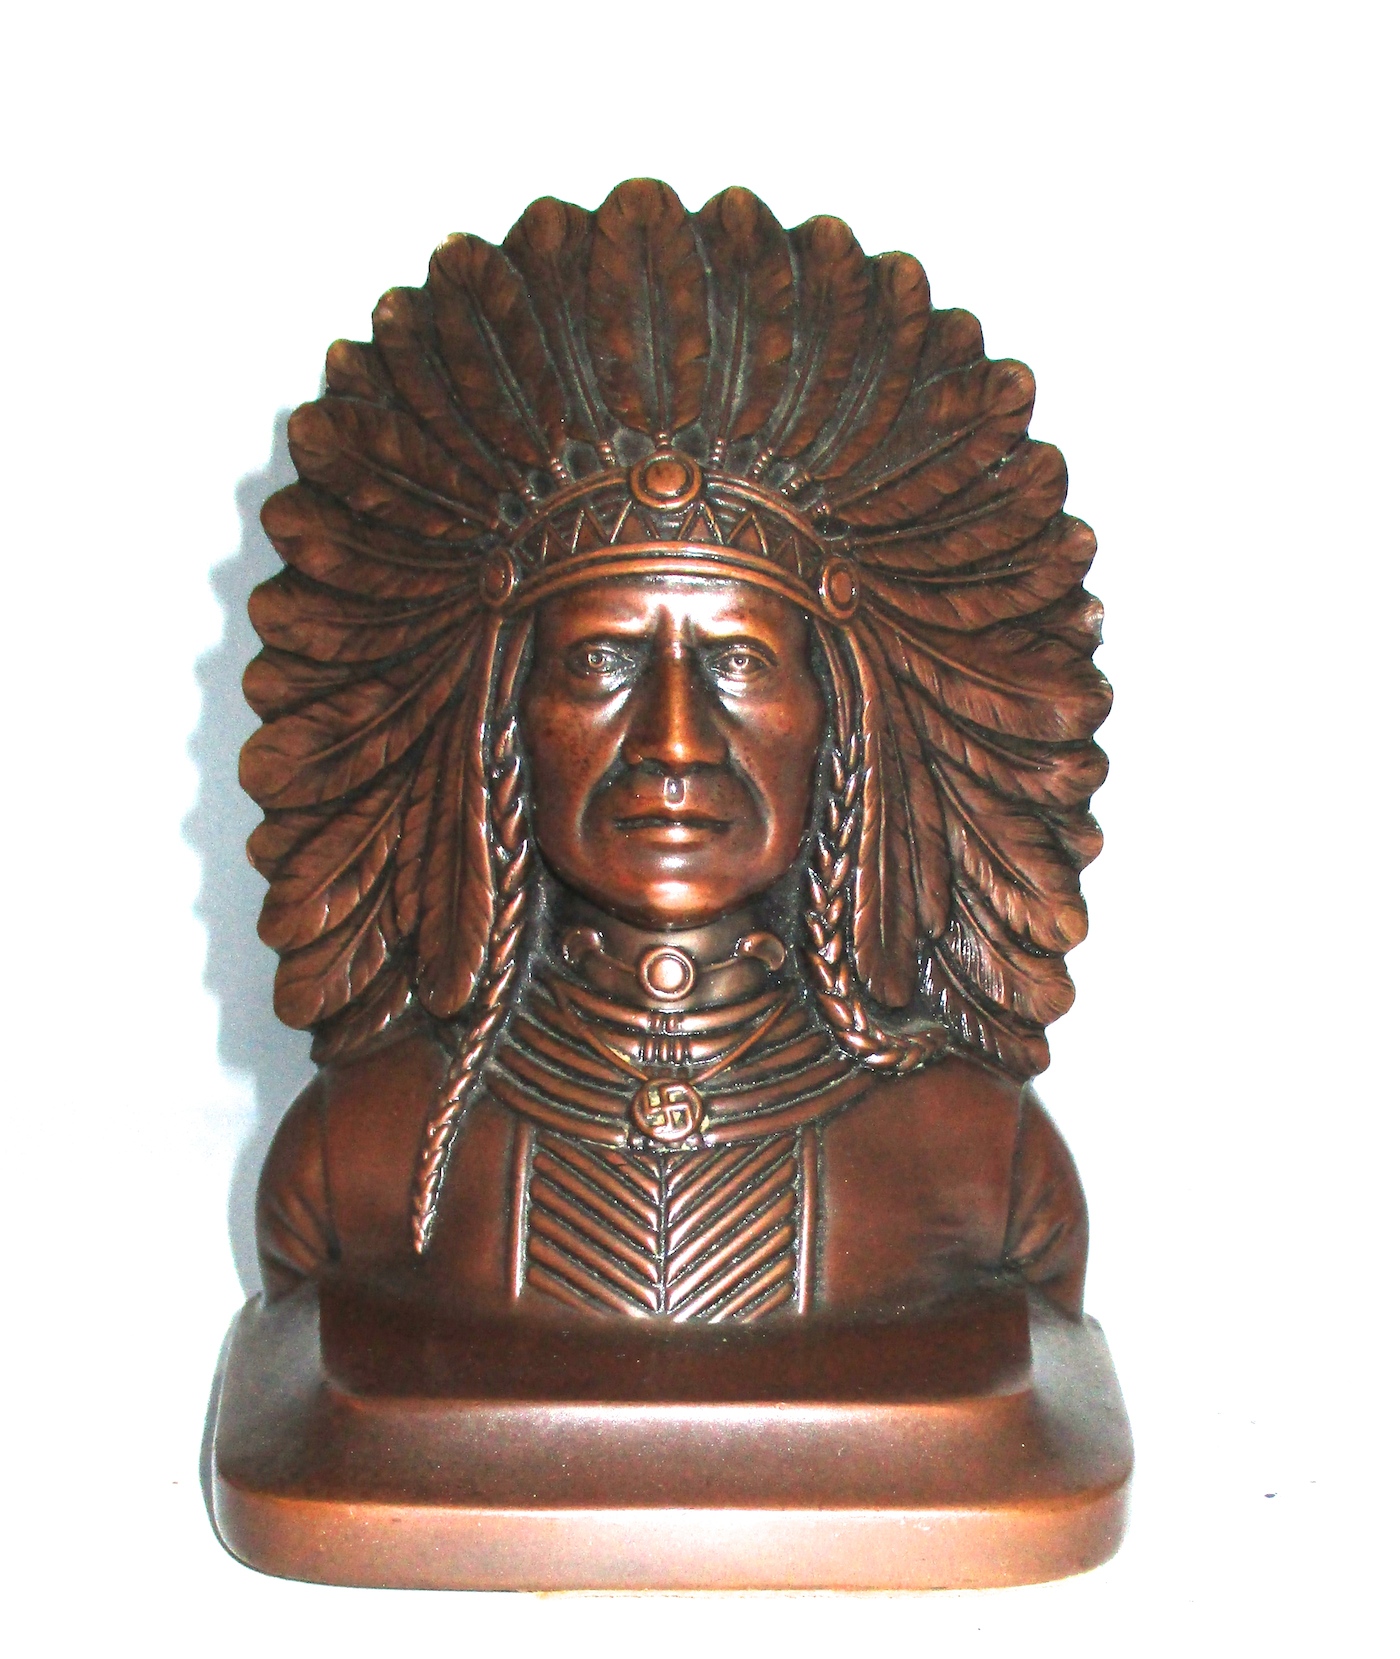 Pair of Jennings Brothers Bronze Indian Chief Bookends (6 1/2" H)